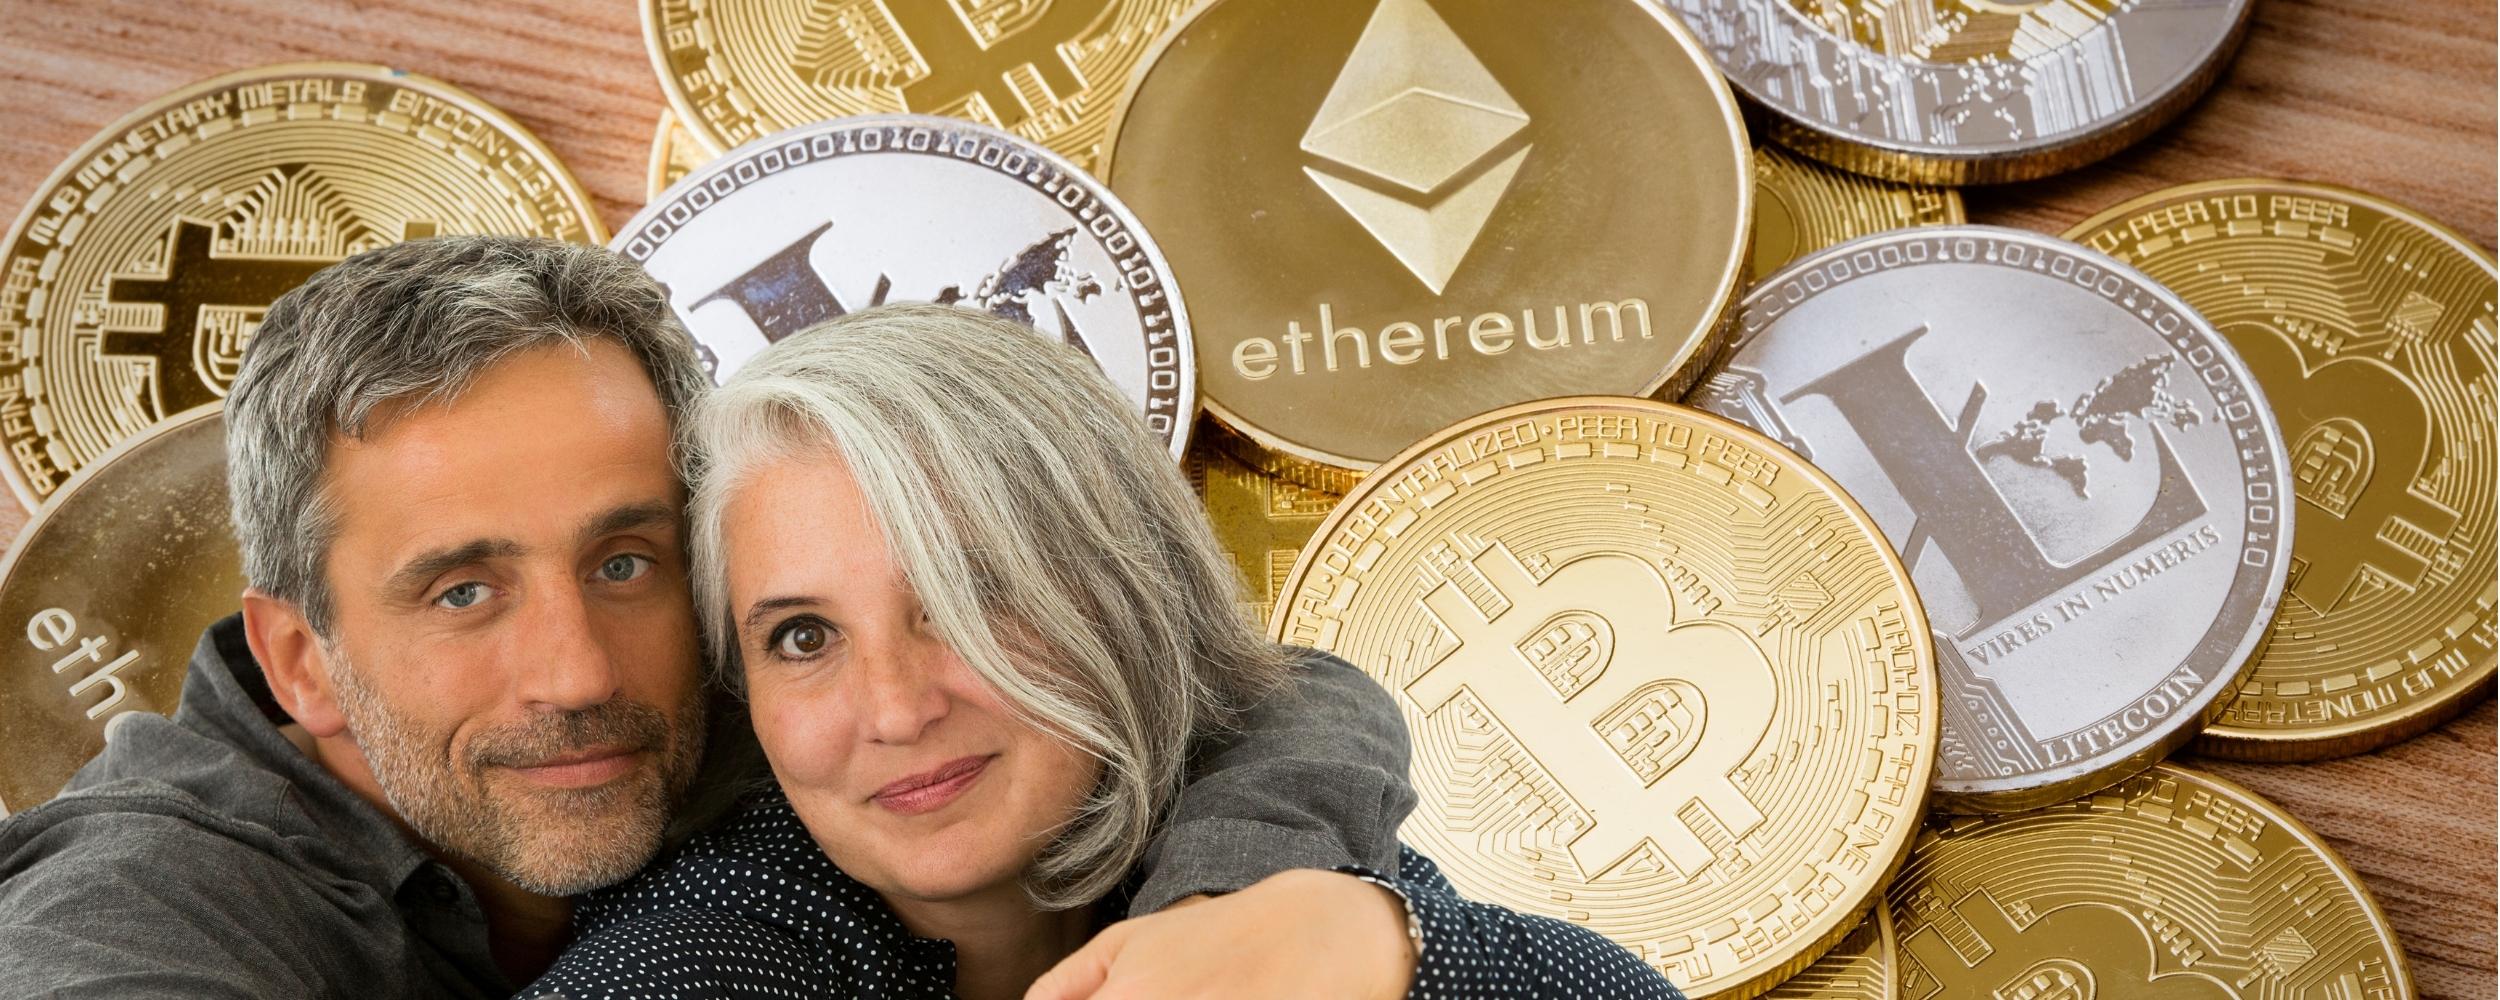 Photo of crypto coins with smiling couple